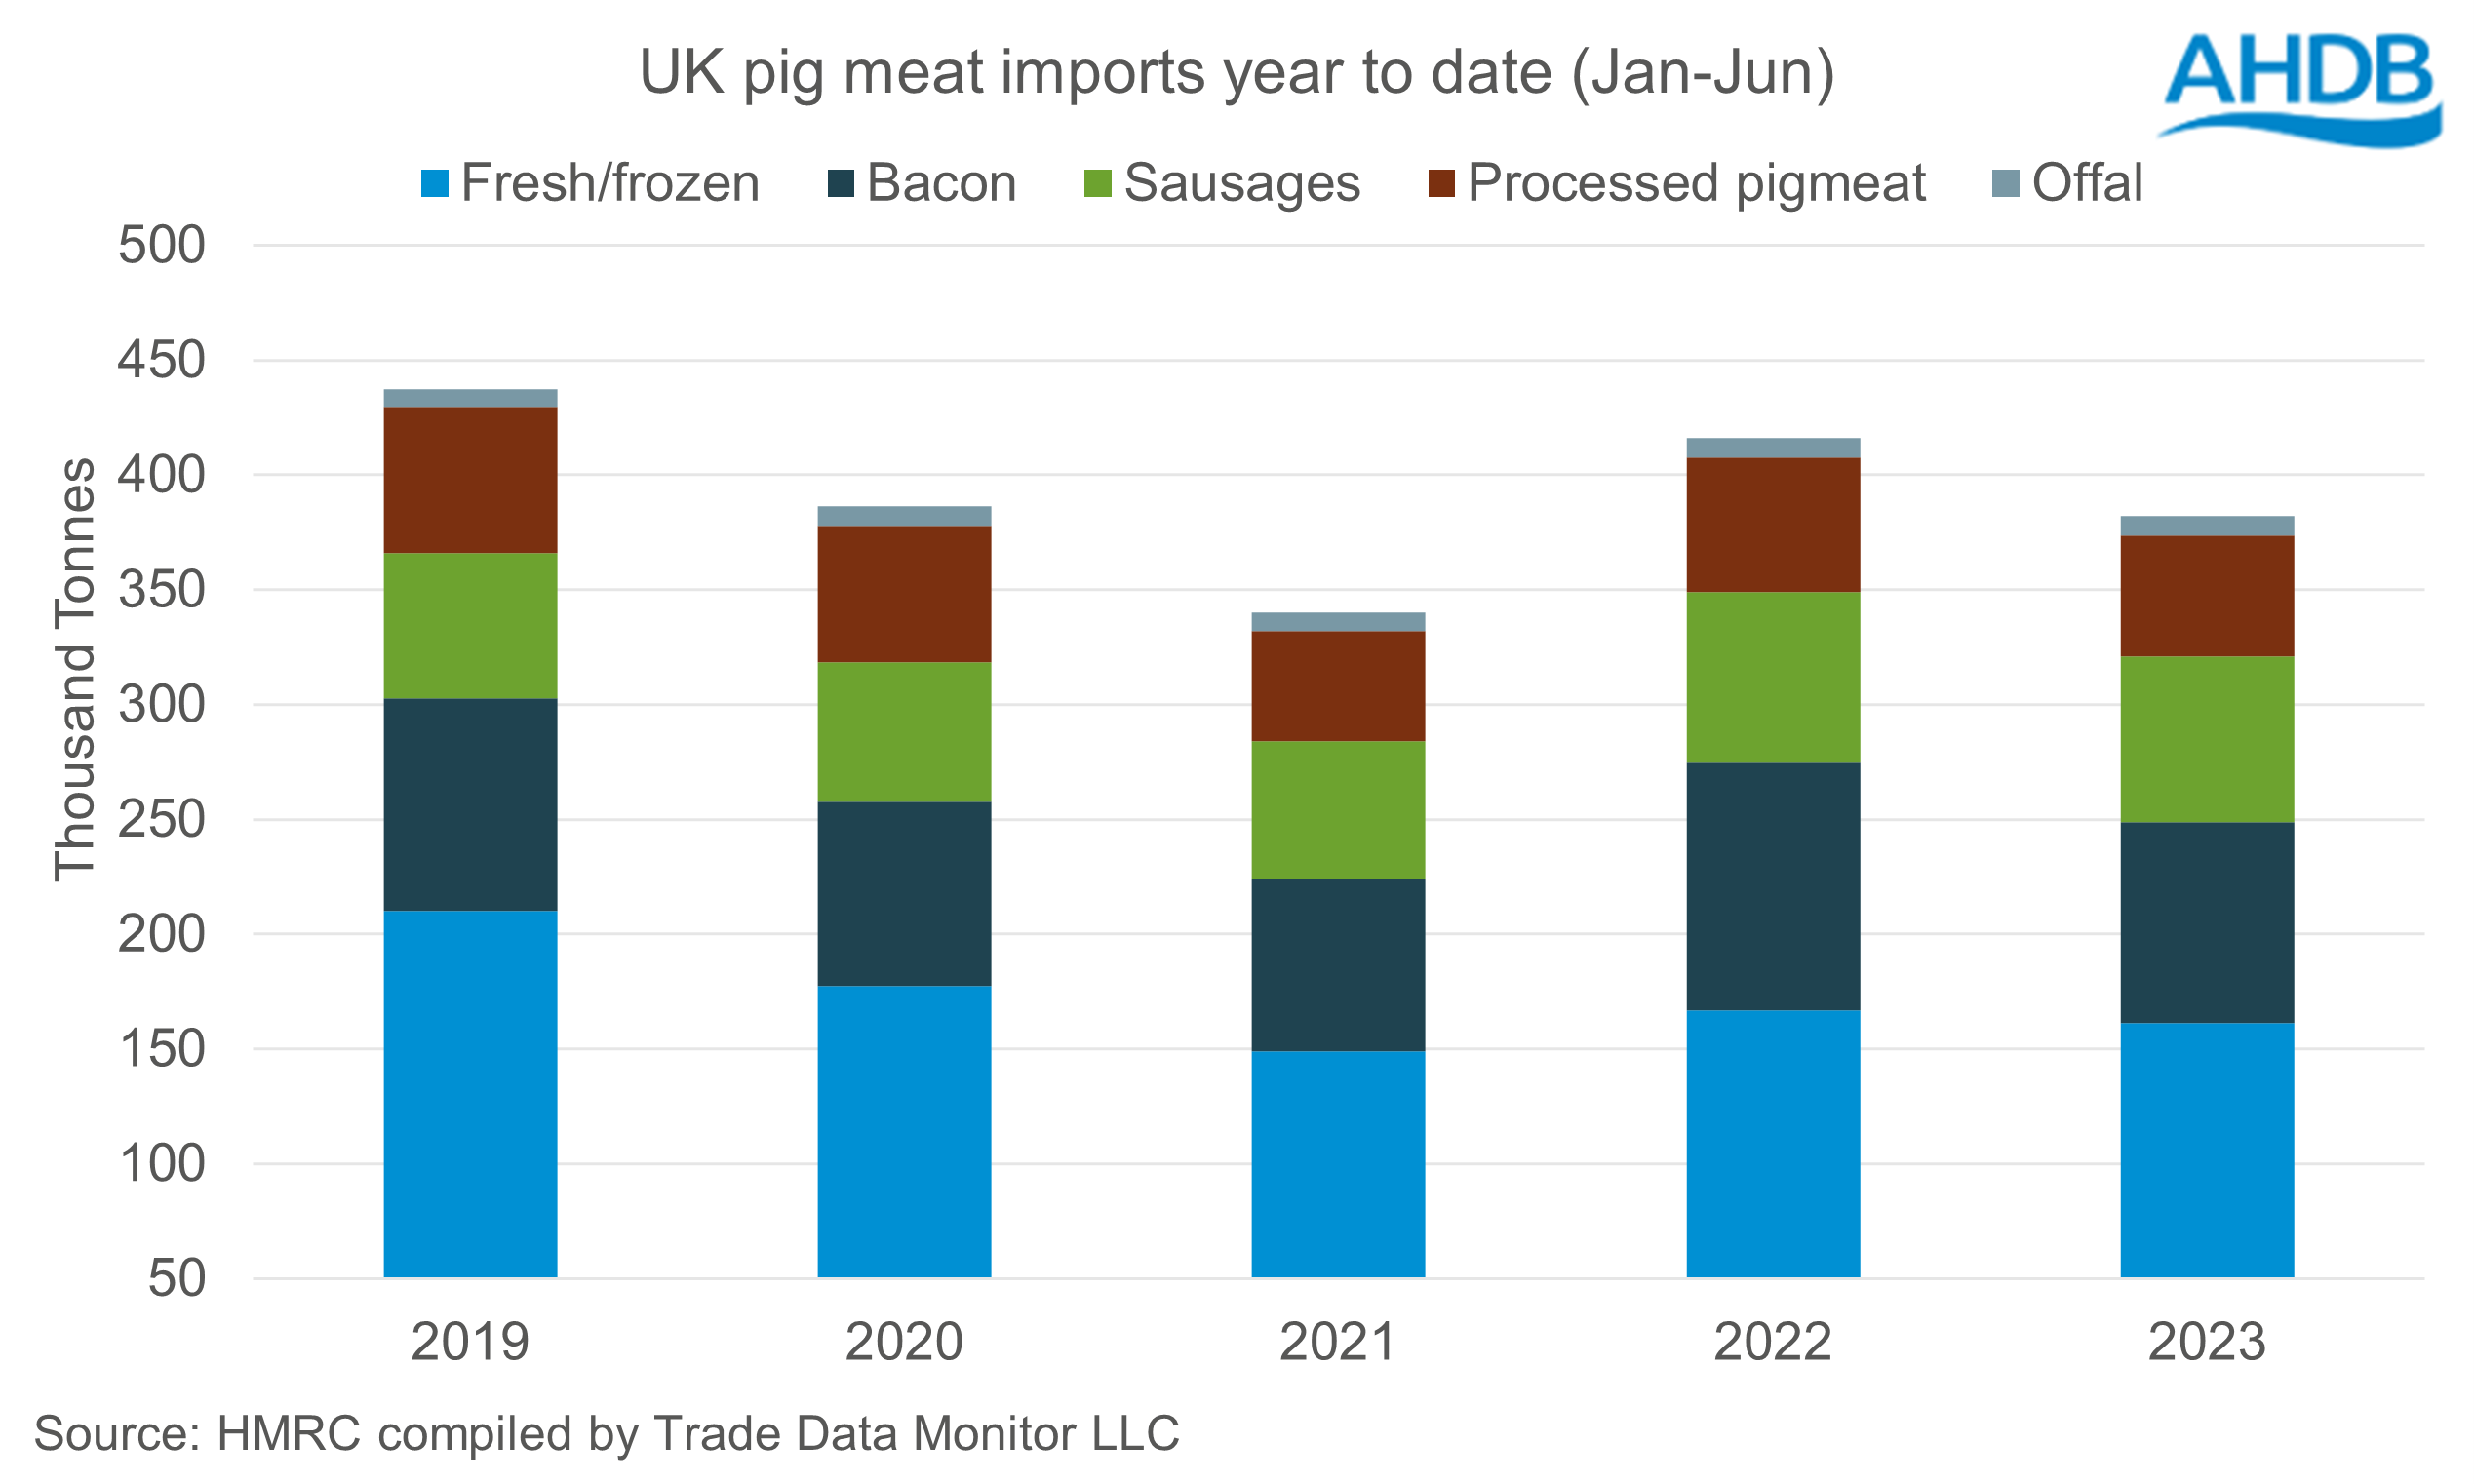 stacked bar chart showing UK pig meat import volumes Jan-Jun by product type